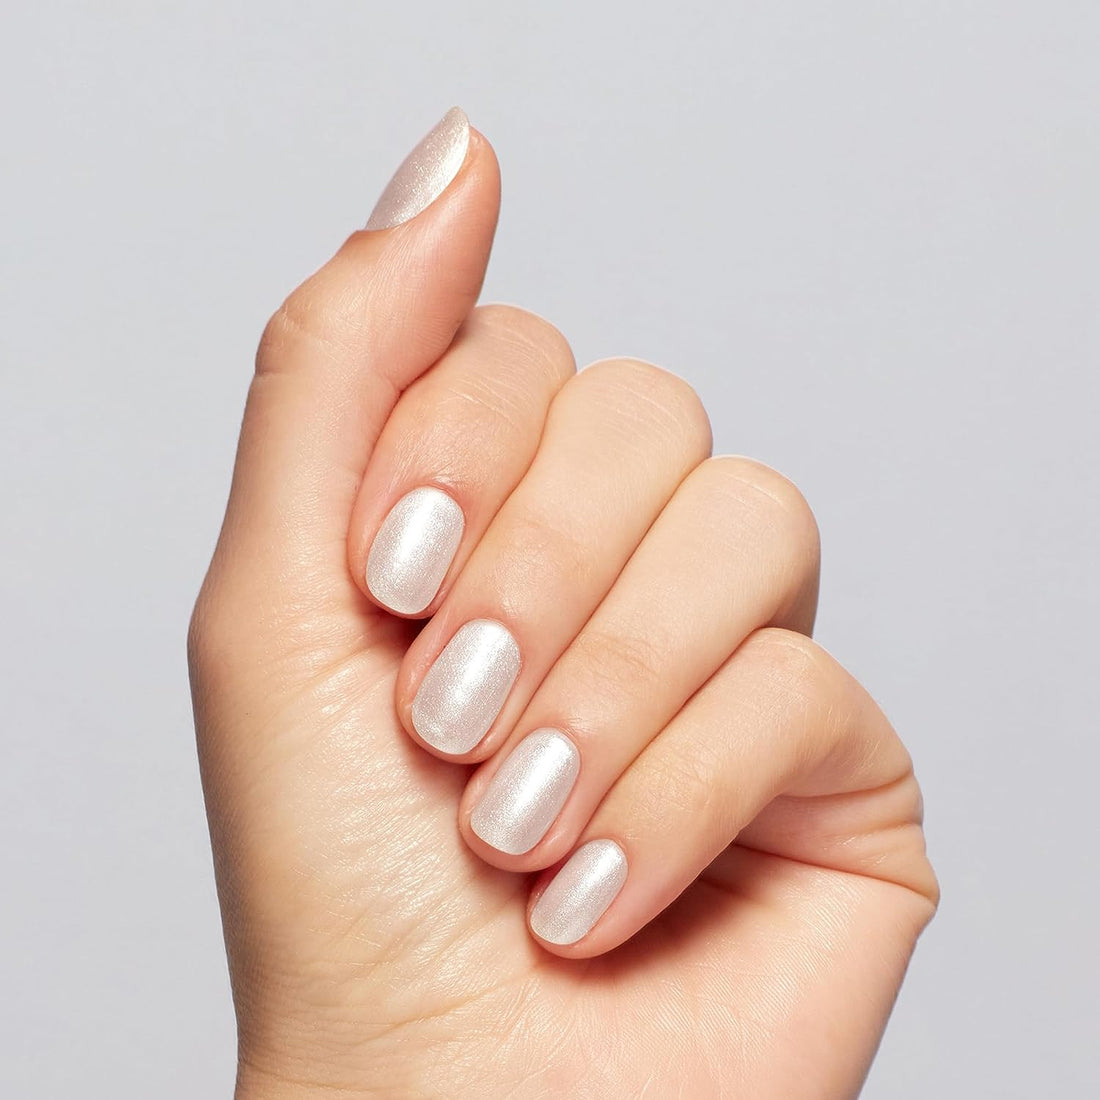 OPI GelColor + Matching Nail Lacquer Gemini and I GCH022 Soft White Shimmer Gel Nail Polish Big Zodiac Energy Collection Fall 2023